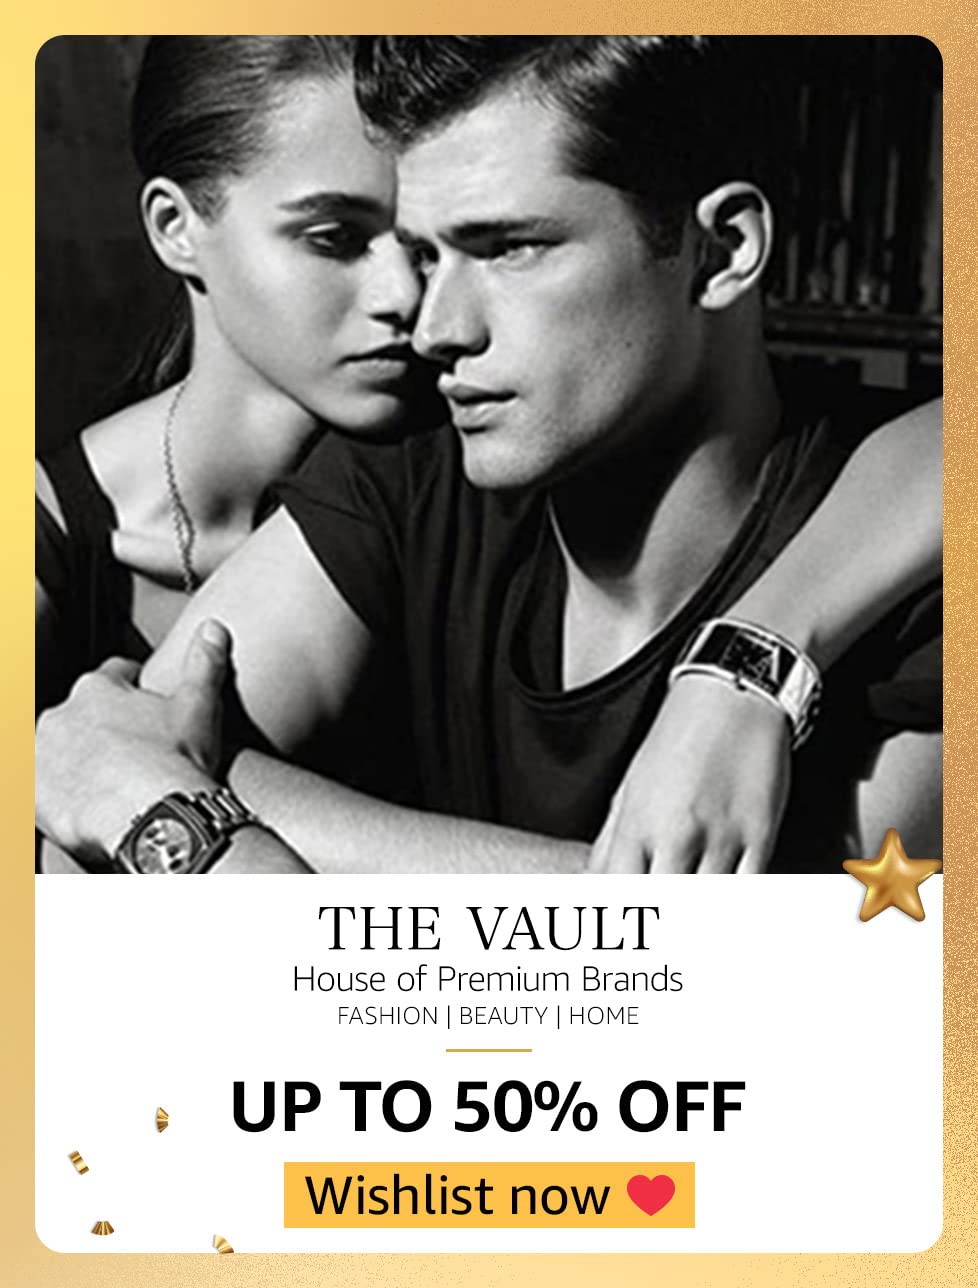 WARDROBE REFRESH SALE | Upto 50% Off on The Vault Fashion Lineup + Save 10% with ICICI Cards (18th-22nd Dec)